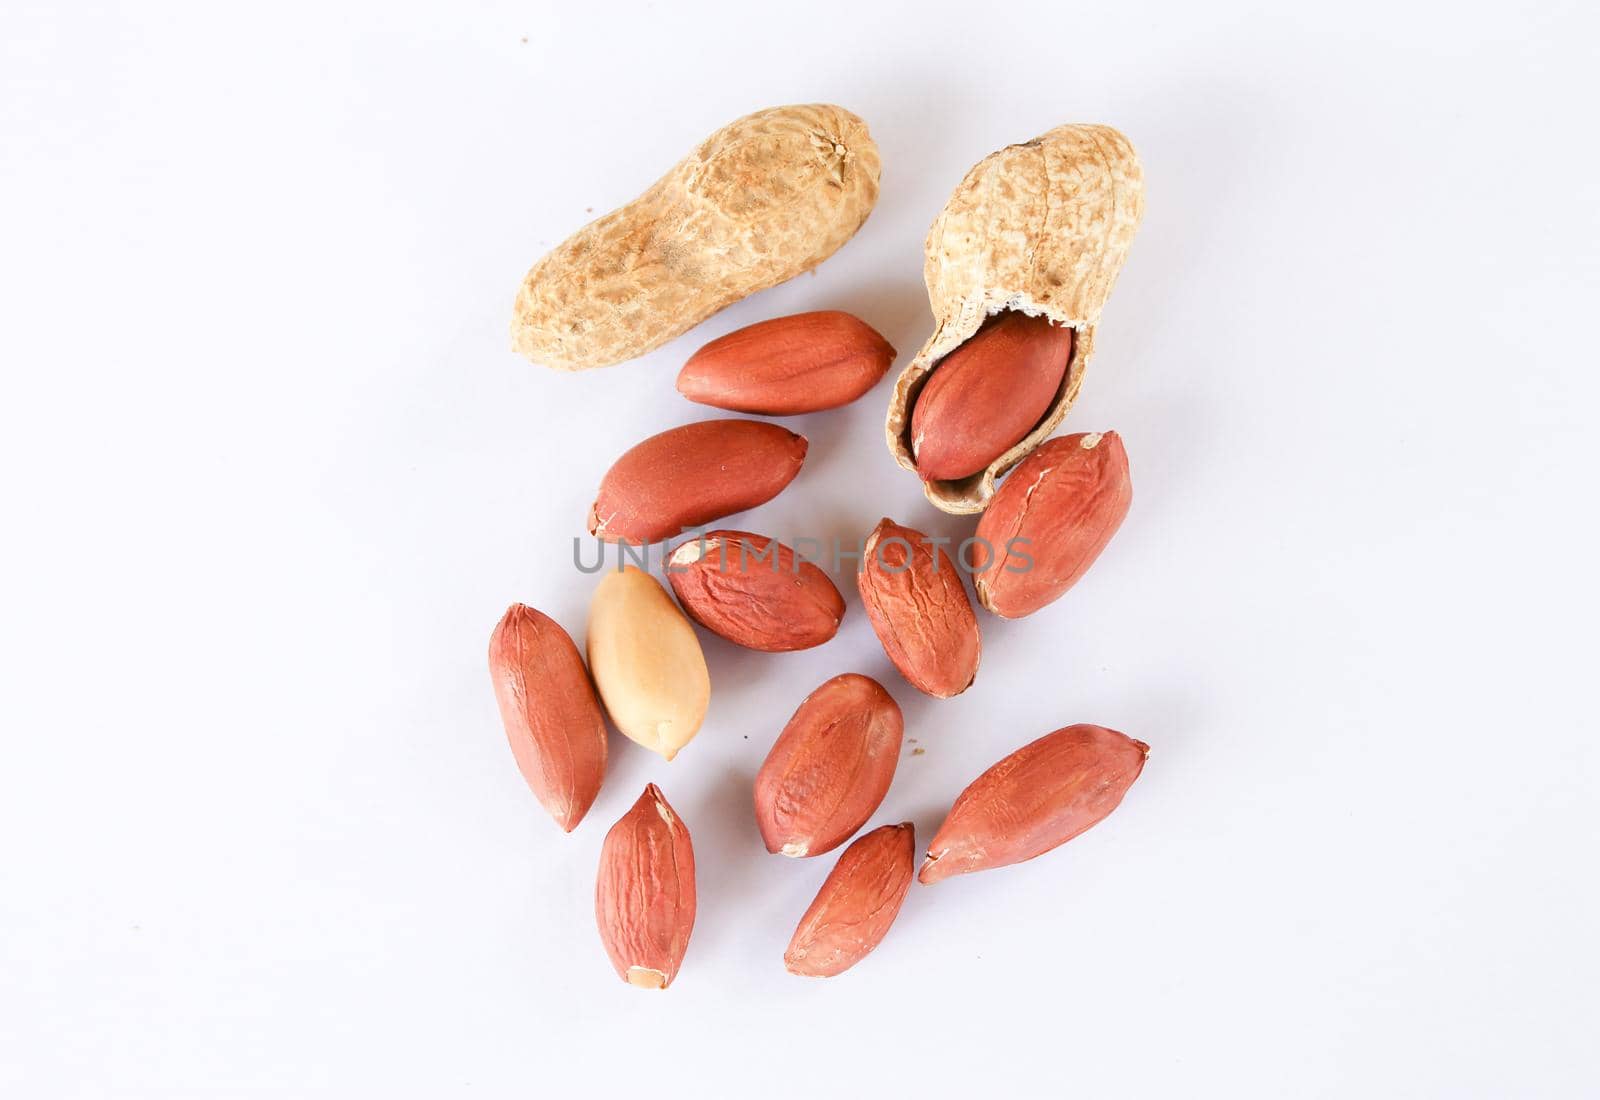 Red and peeled peanuts on a white background. One peanut was peeled, revealing a red seed inside. by pichai25